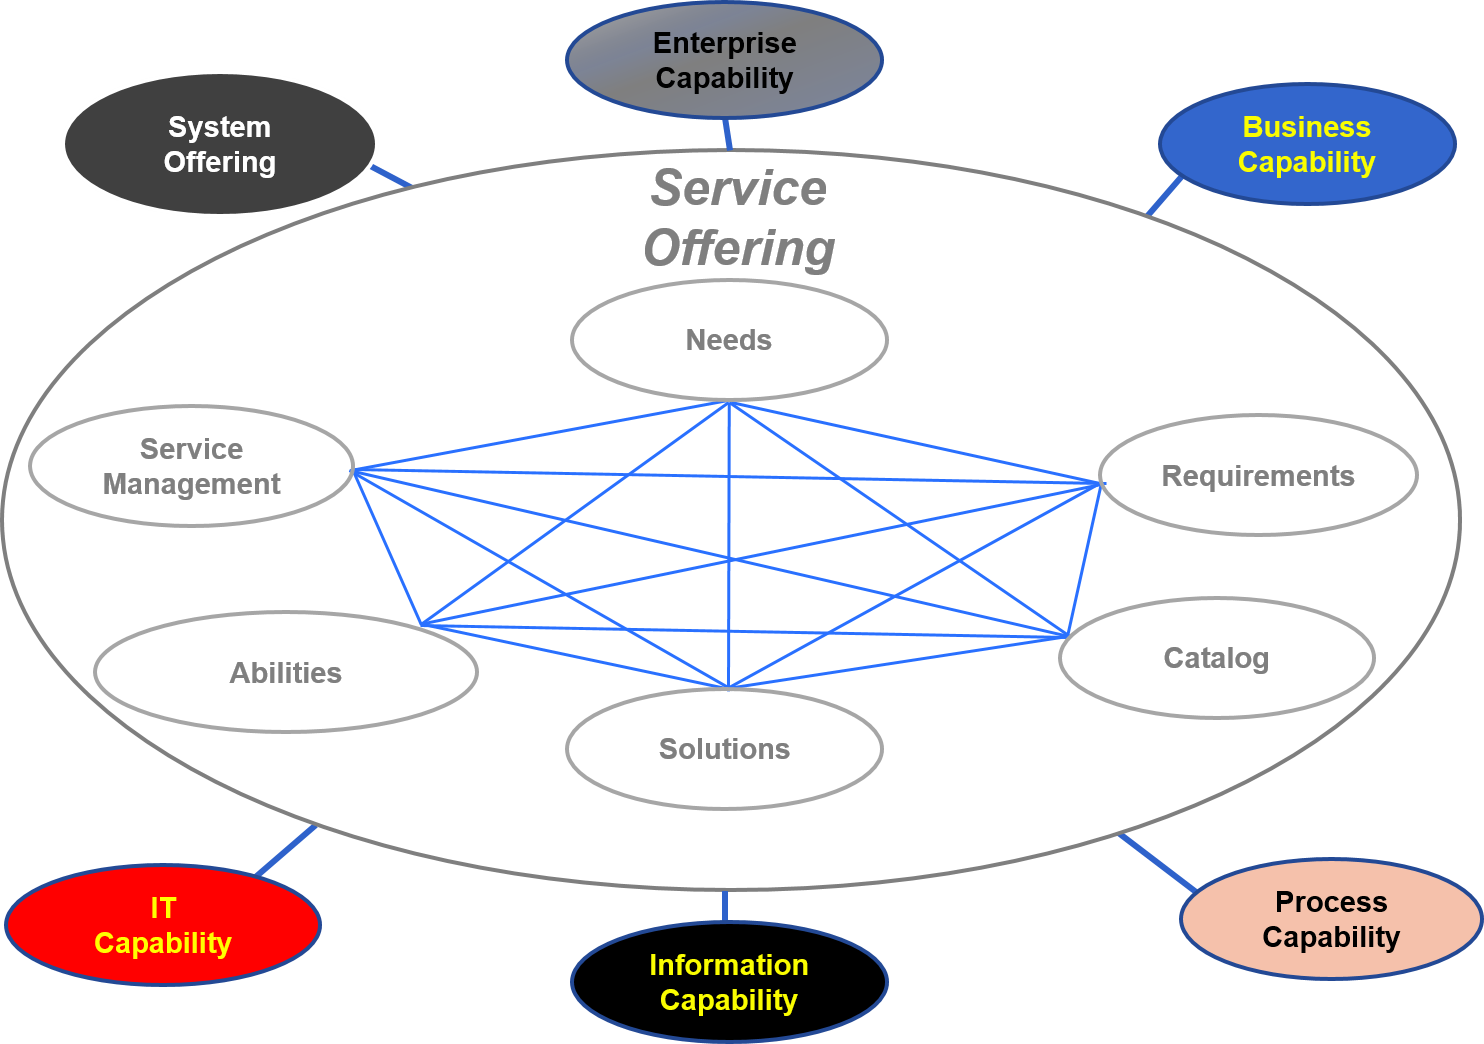 Service Offering